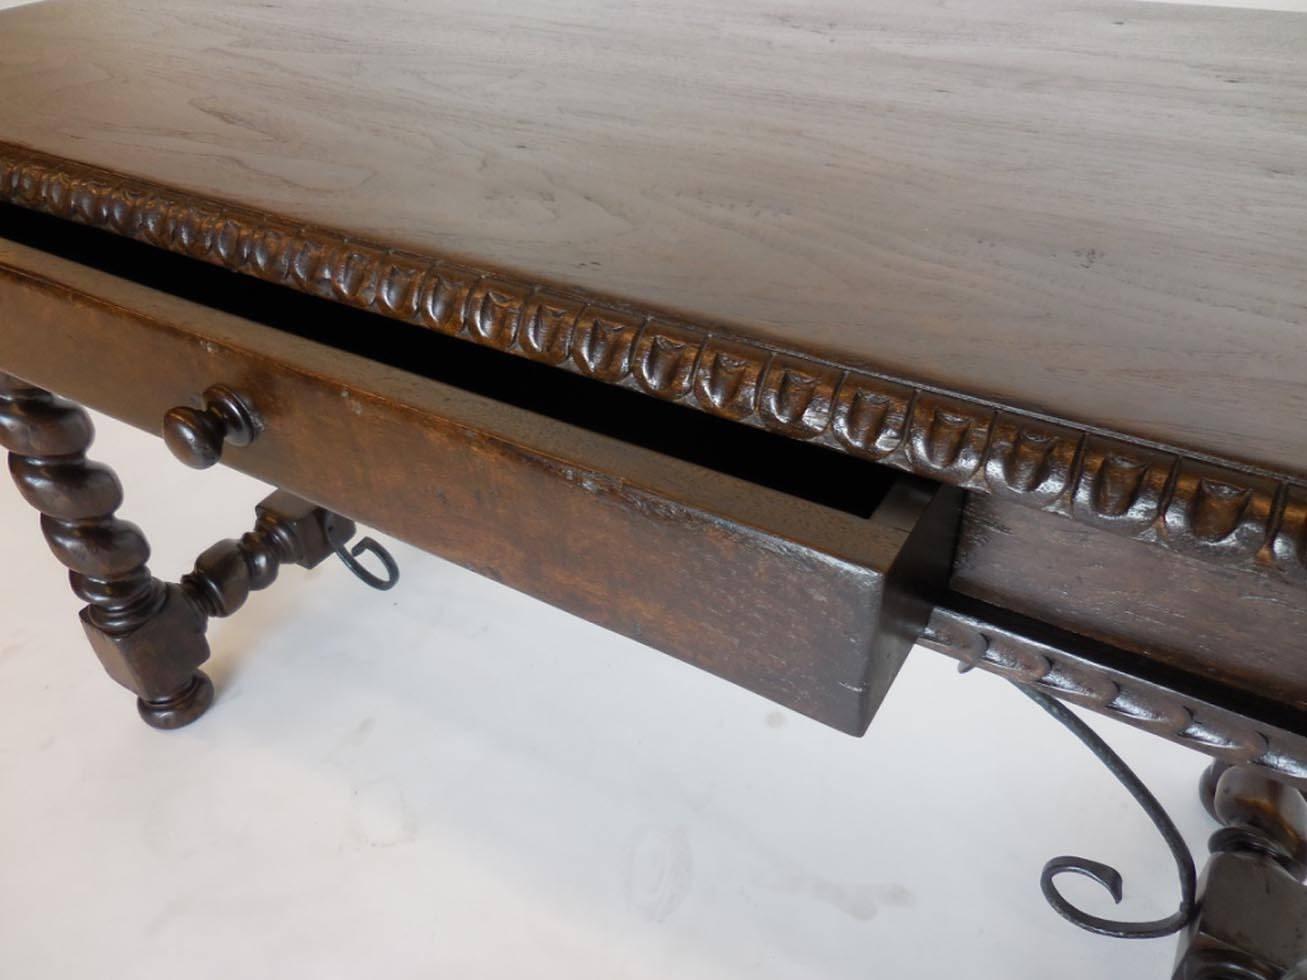 Contemporary Dos Gallos Custom Barley Twist Writing Desk With Carved Detail and Iron Support